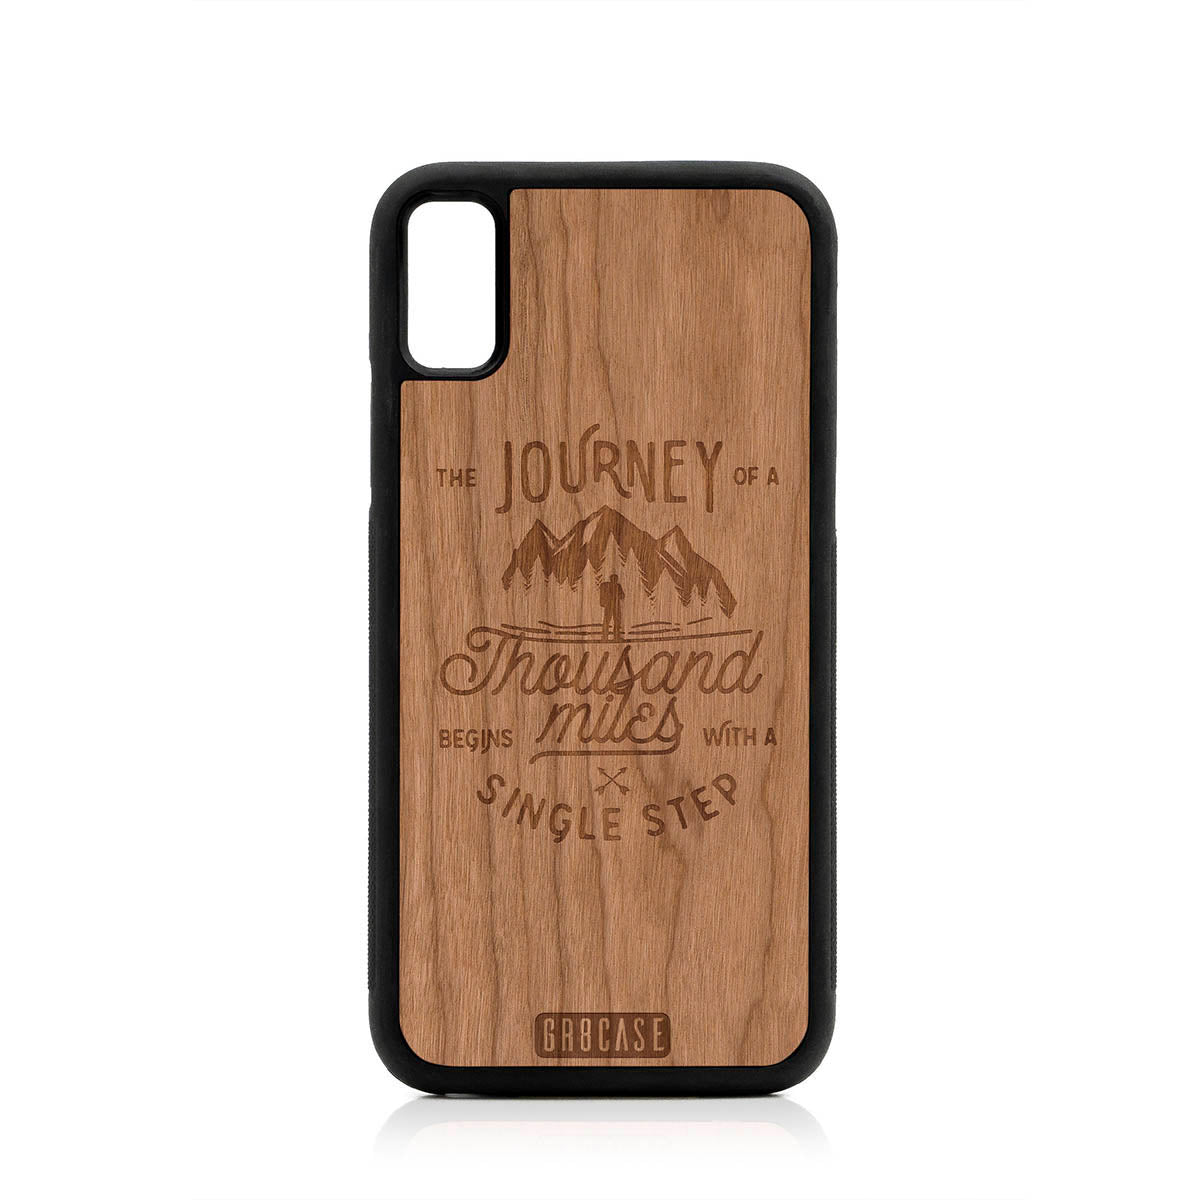 The Journey Of A Thousand Miles Begins With A Single Step Design Wood Case For iPhone XR